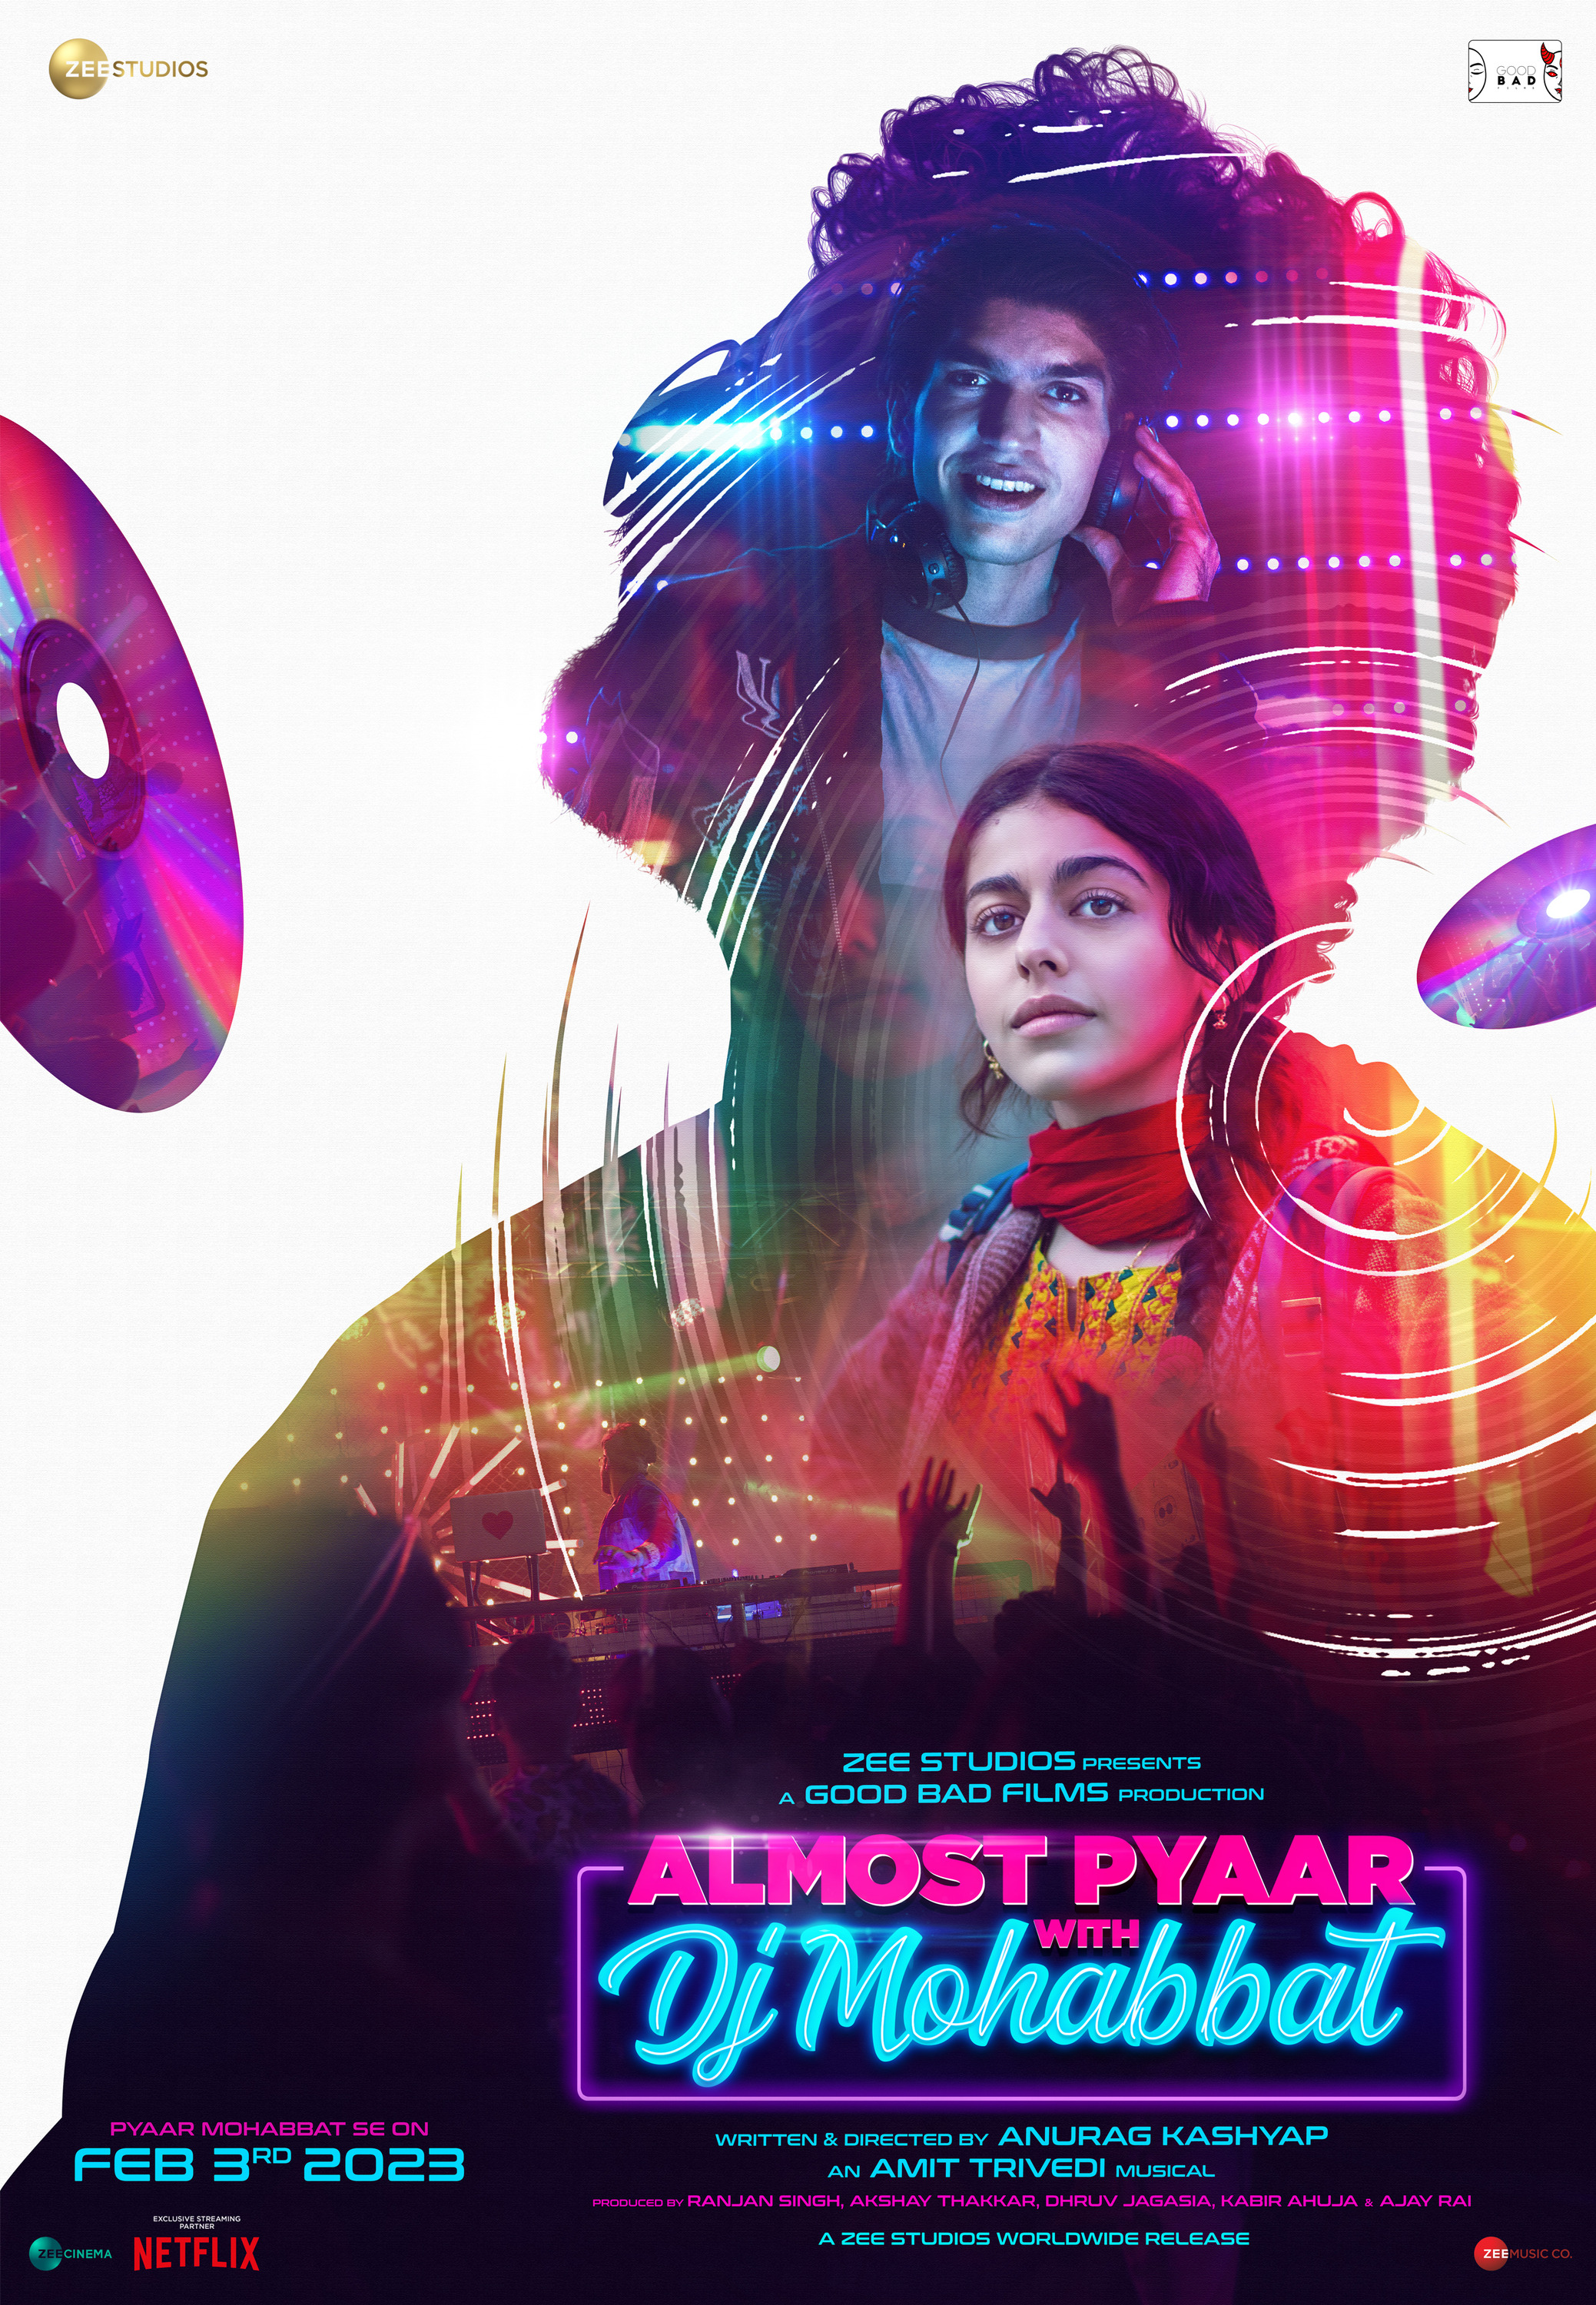 Mega Sized Movie Poster Image for Almost Pyaar with DJ Mohabbat (#4 of 5)